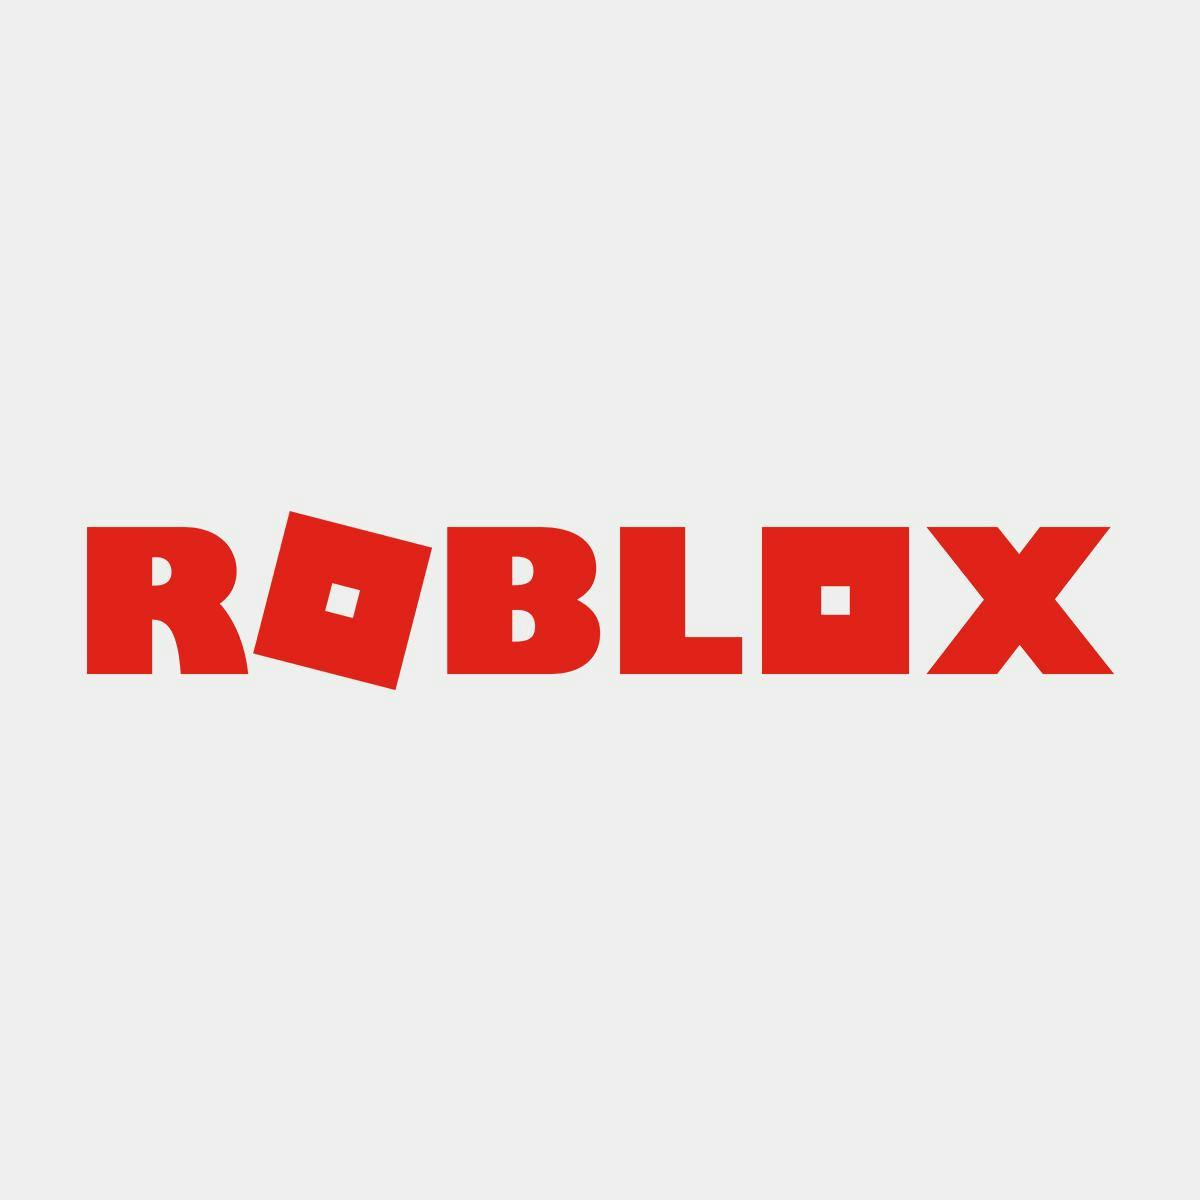 Roblox Game Creation And Coding Session 2 Summer Camp 13 Aug 2018 - roblox events 2018 in august